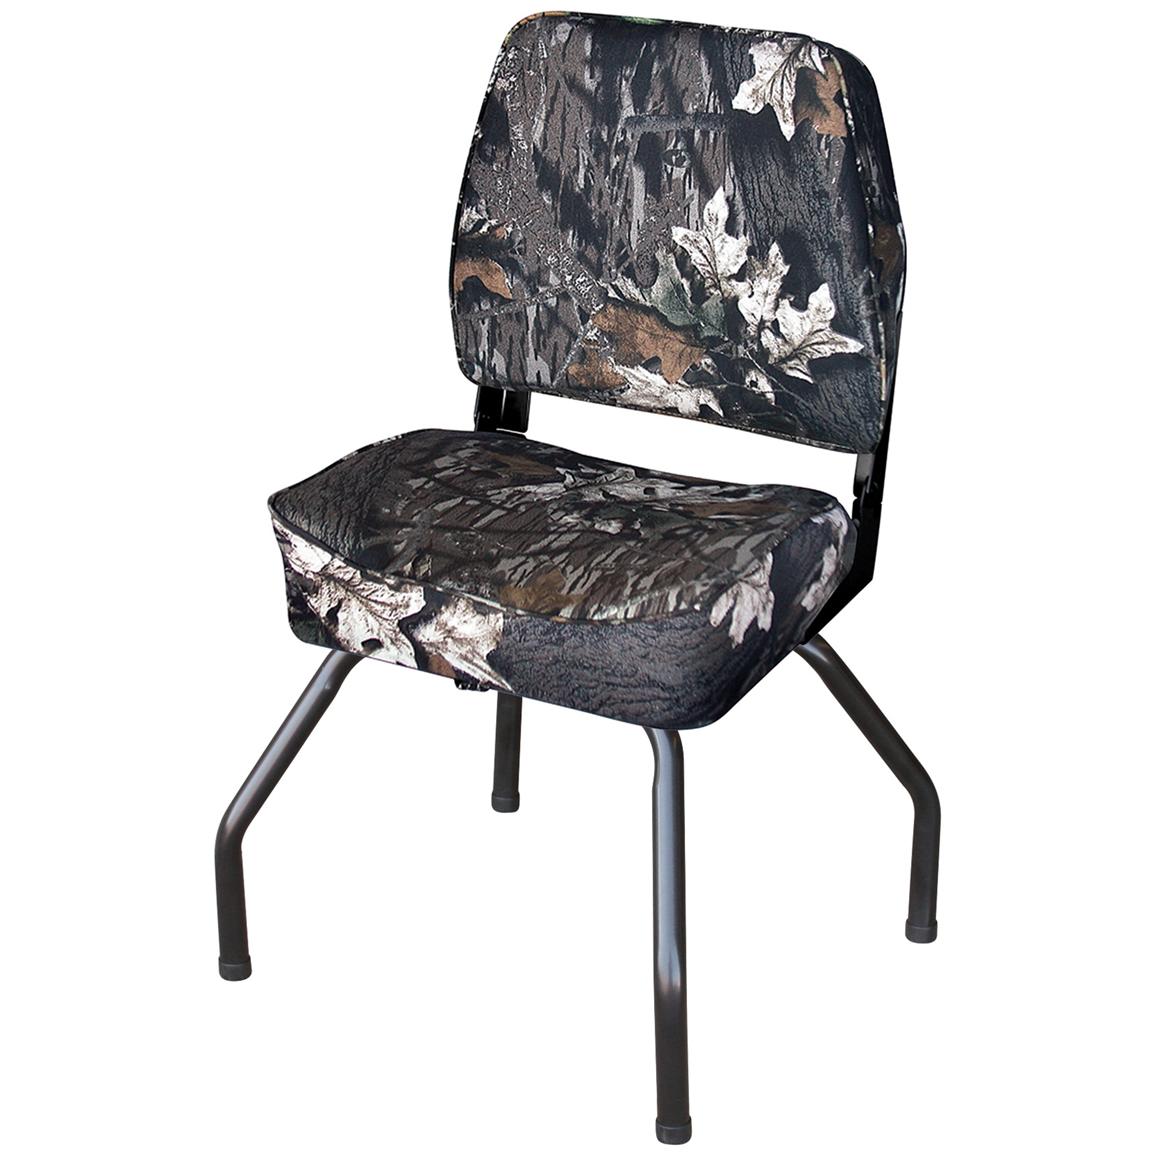 Wise Combo Duck Boat Hunting Blind Seat 204003 Fishing